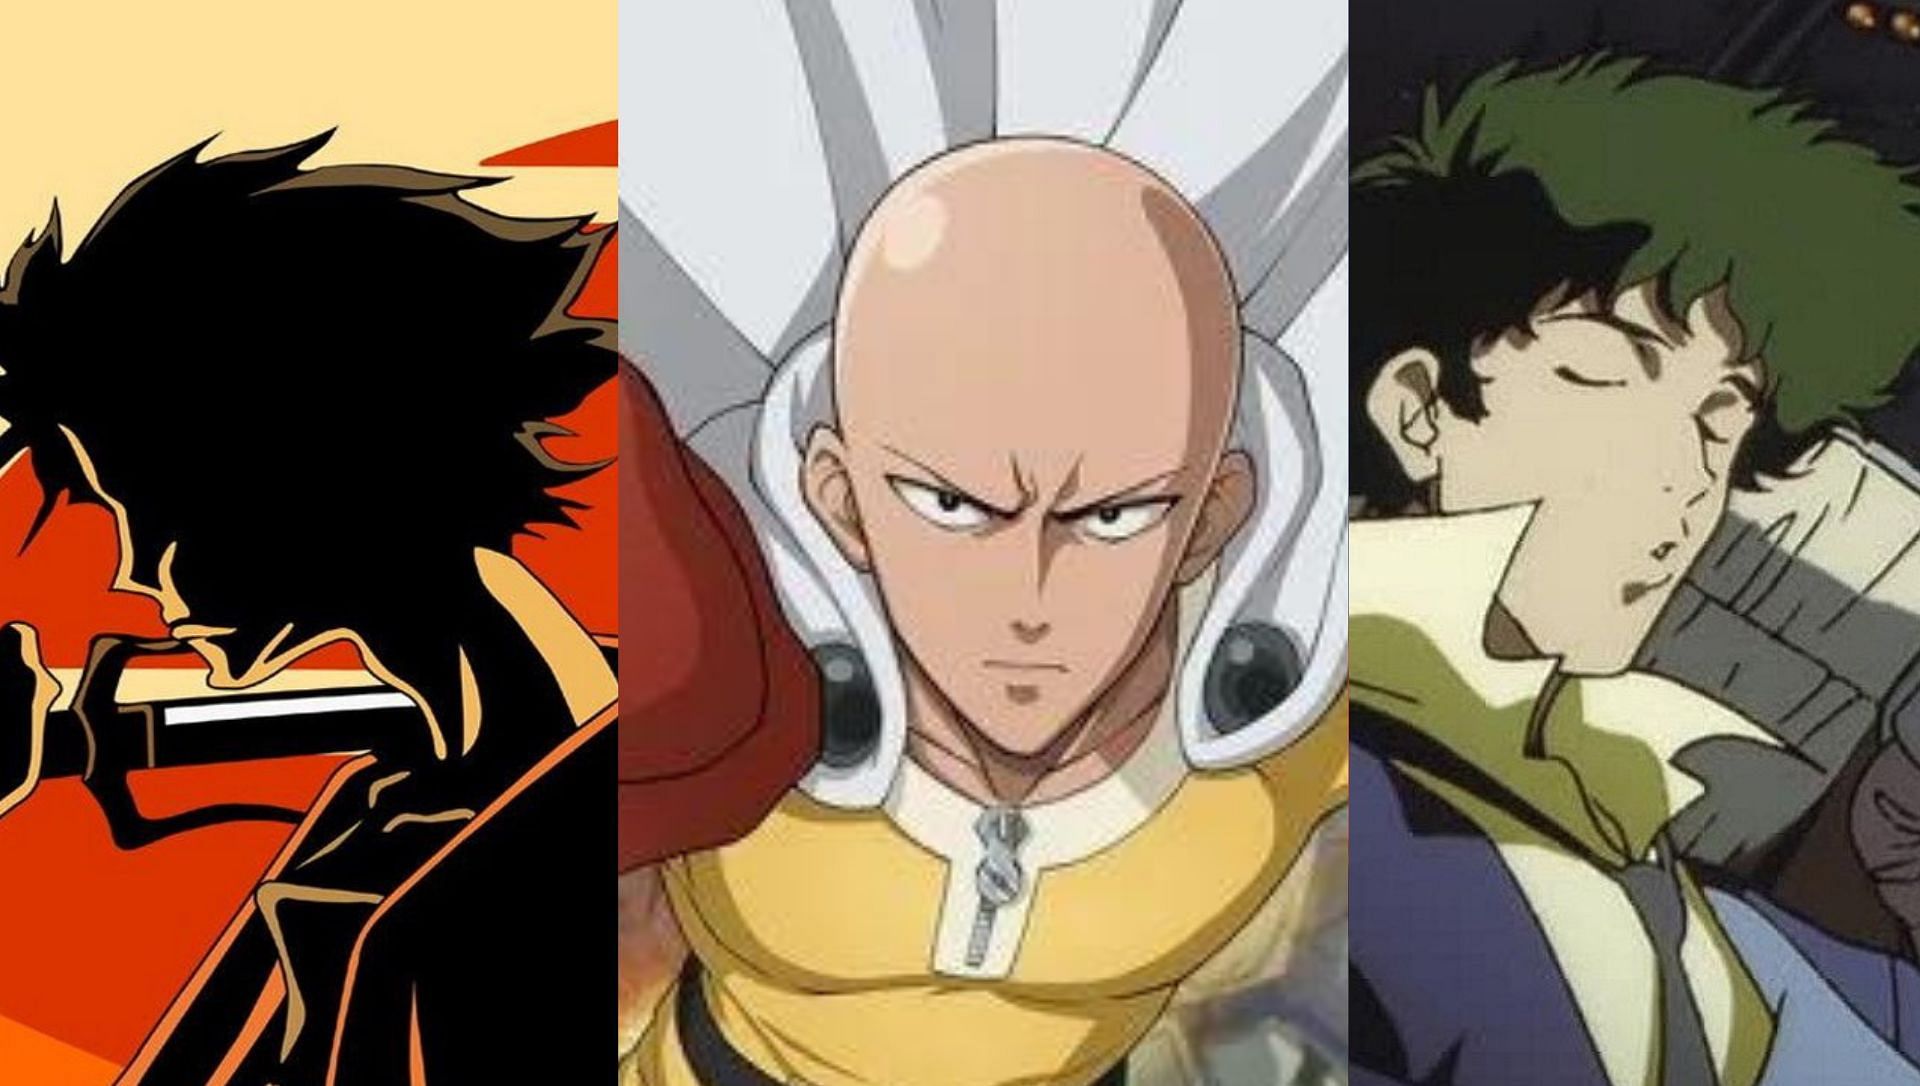 The 20 Best Anime Series to Watch on Netflix Right Now